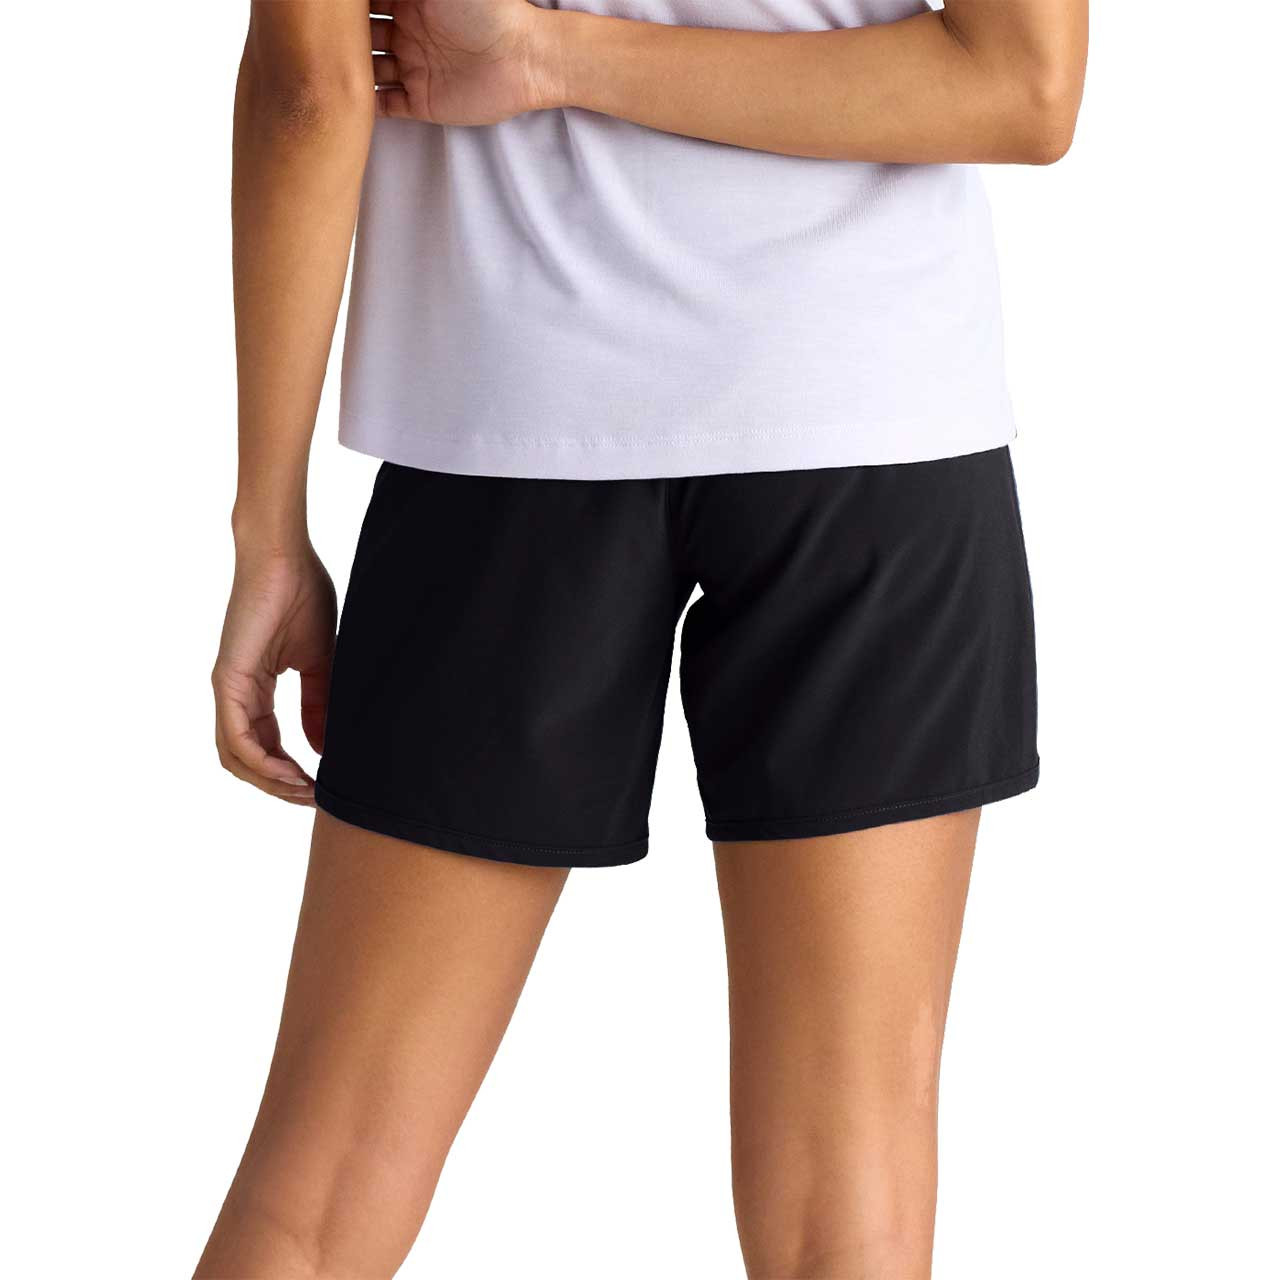 Free Fly Women's Bamboo-Lined Breeze Short - Black